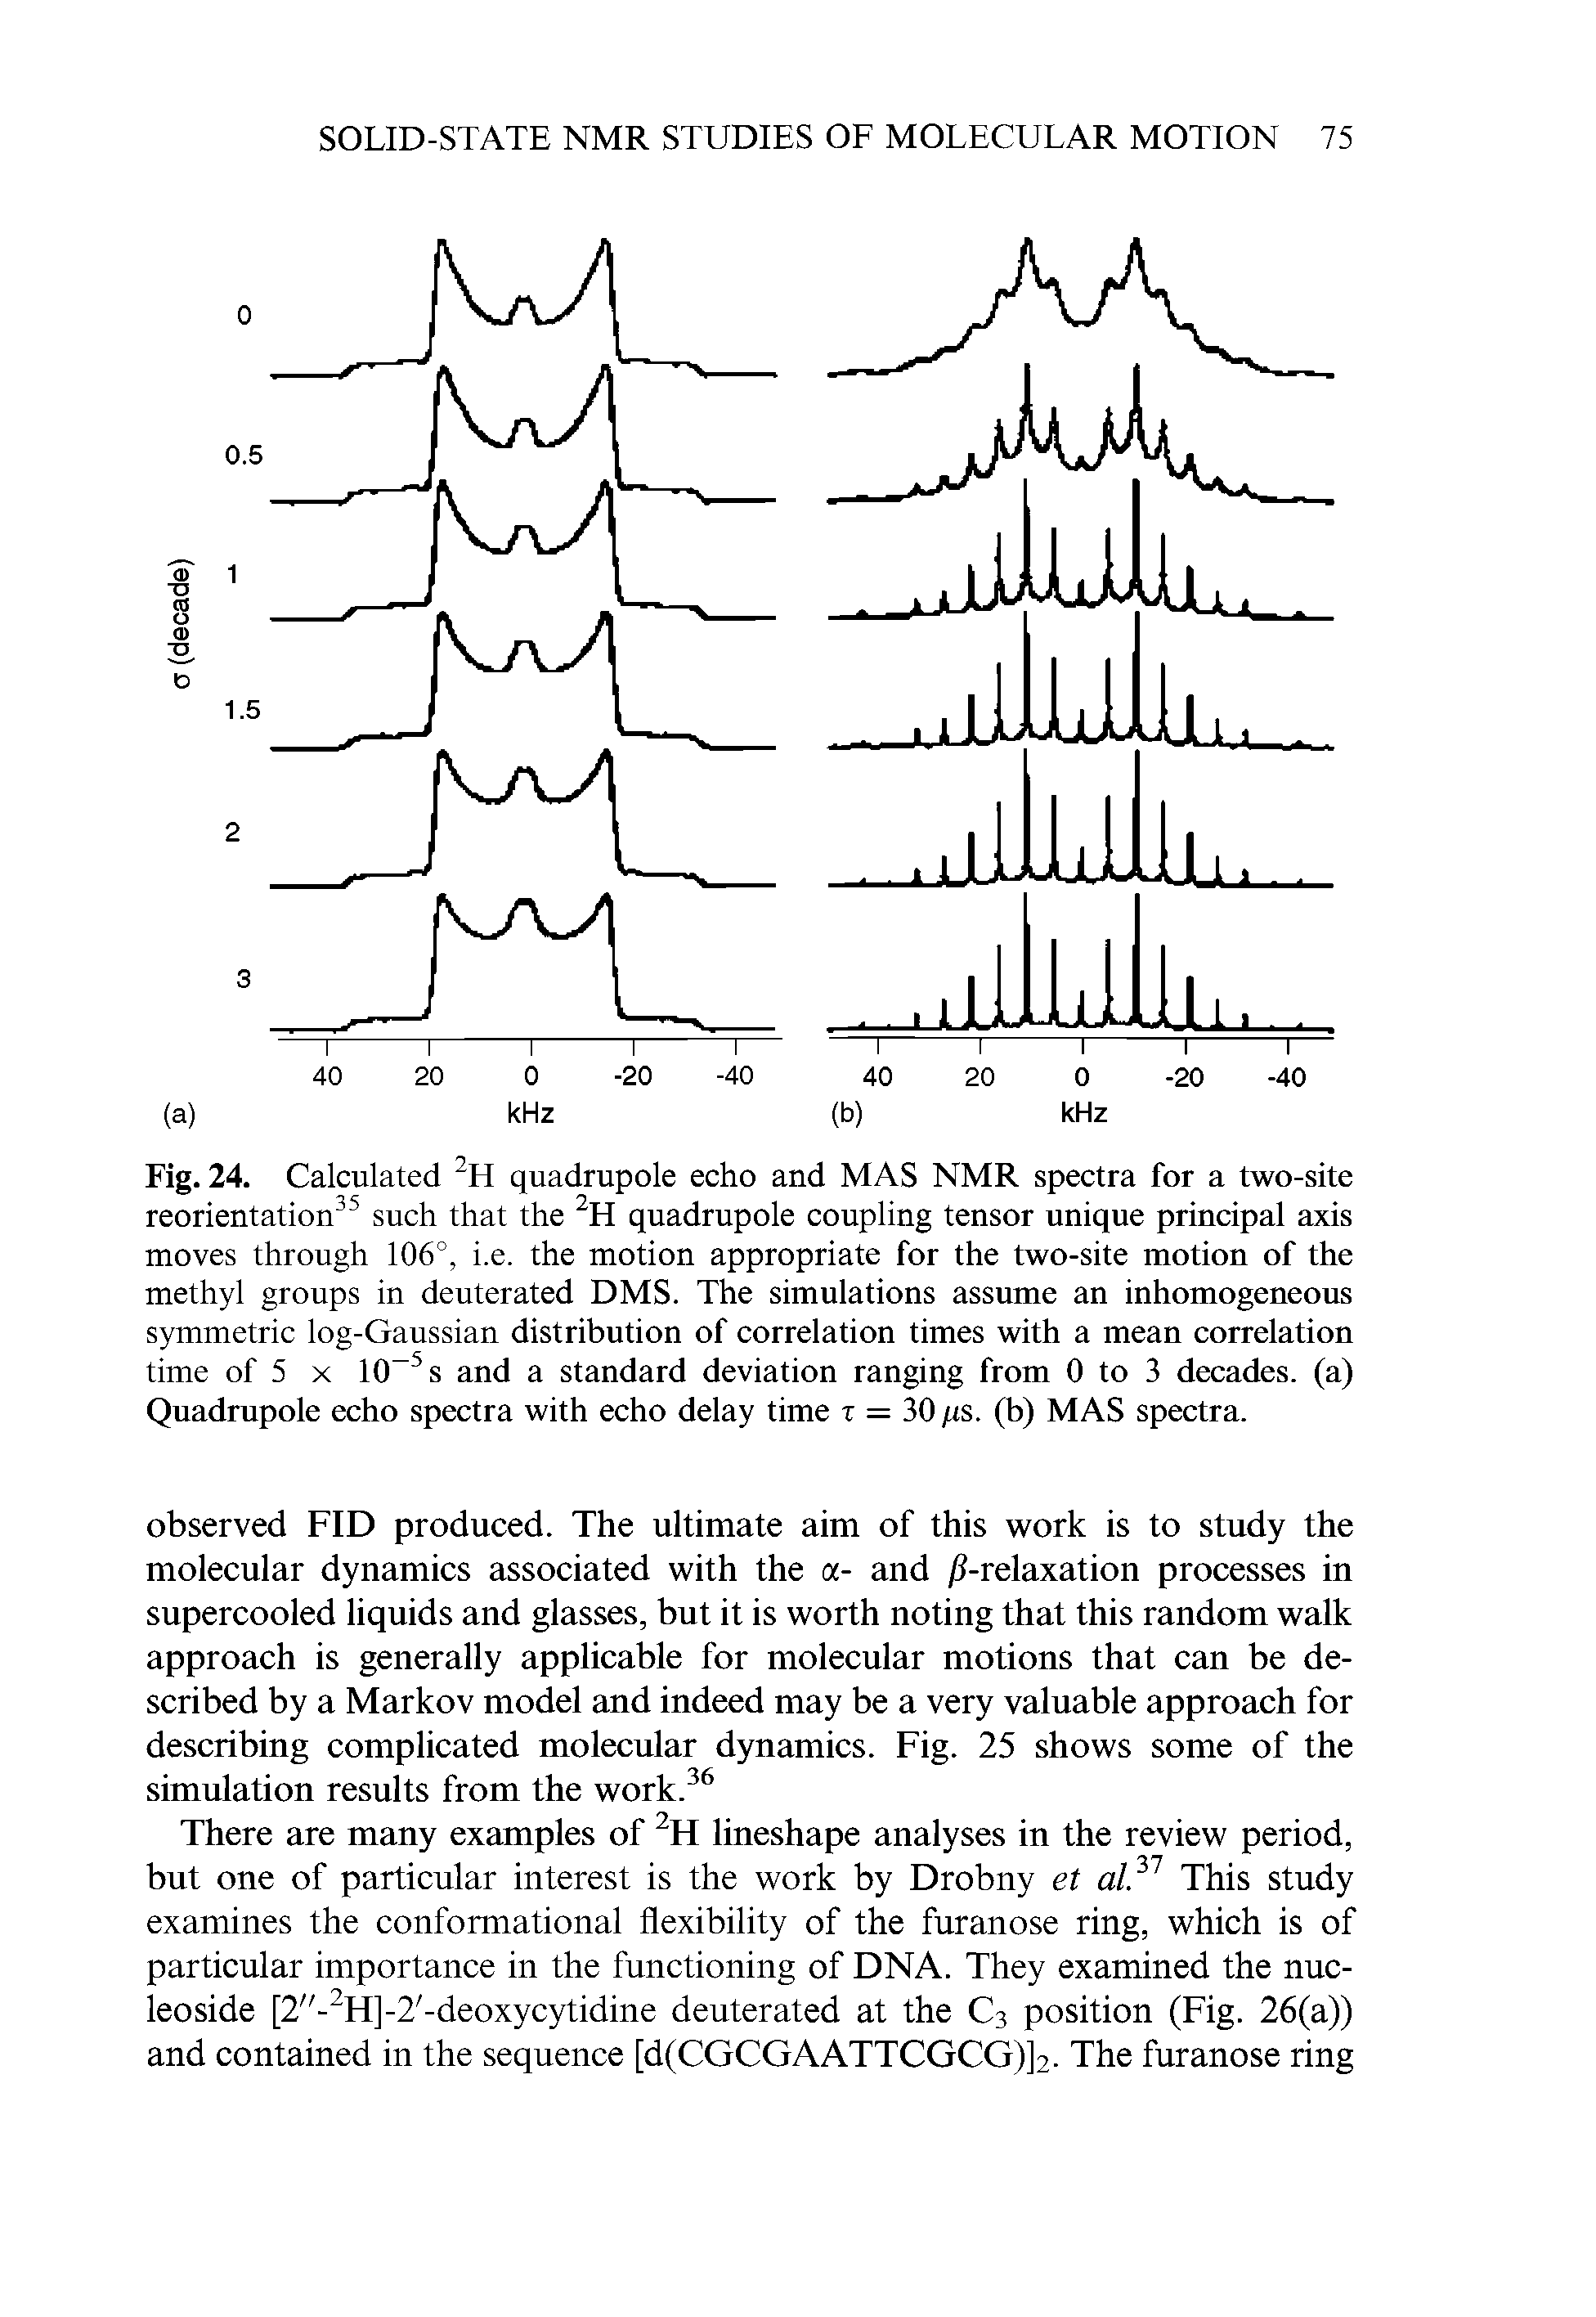 Fig. 24. Calculated 2H quadrupole echo and MAS NMR spectra for a two-site reorientation35 such that the 2H quadrupole coupling tensor unique principal axis moves through 106°, i.e. the motion appropriate for the two-site motion of the methyl groups in deuterated DMS. The simulations assume an inhomogeneous symmetric log-Gaussian distribution of correlation times with a mean correlation time of 5 x 10 5s and a standard deviation ranging from 0 to 3 decades, (a) Quadrupole echo spectra with echo delay time t = 30 /is. (b) MAS spectra.